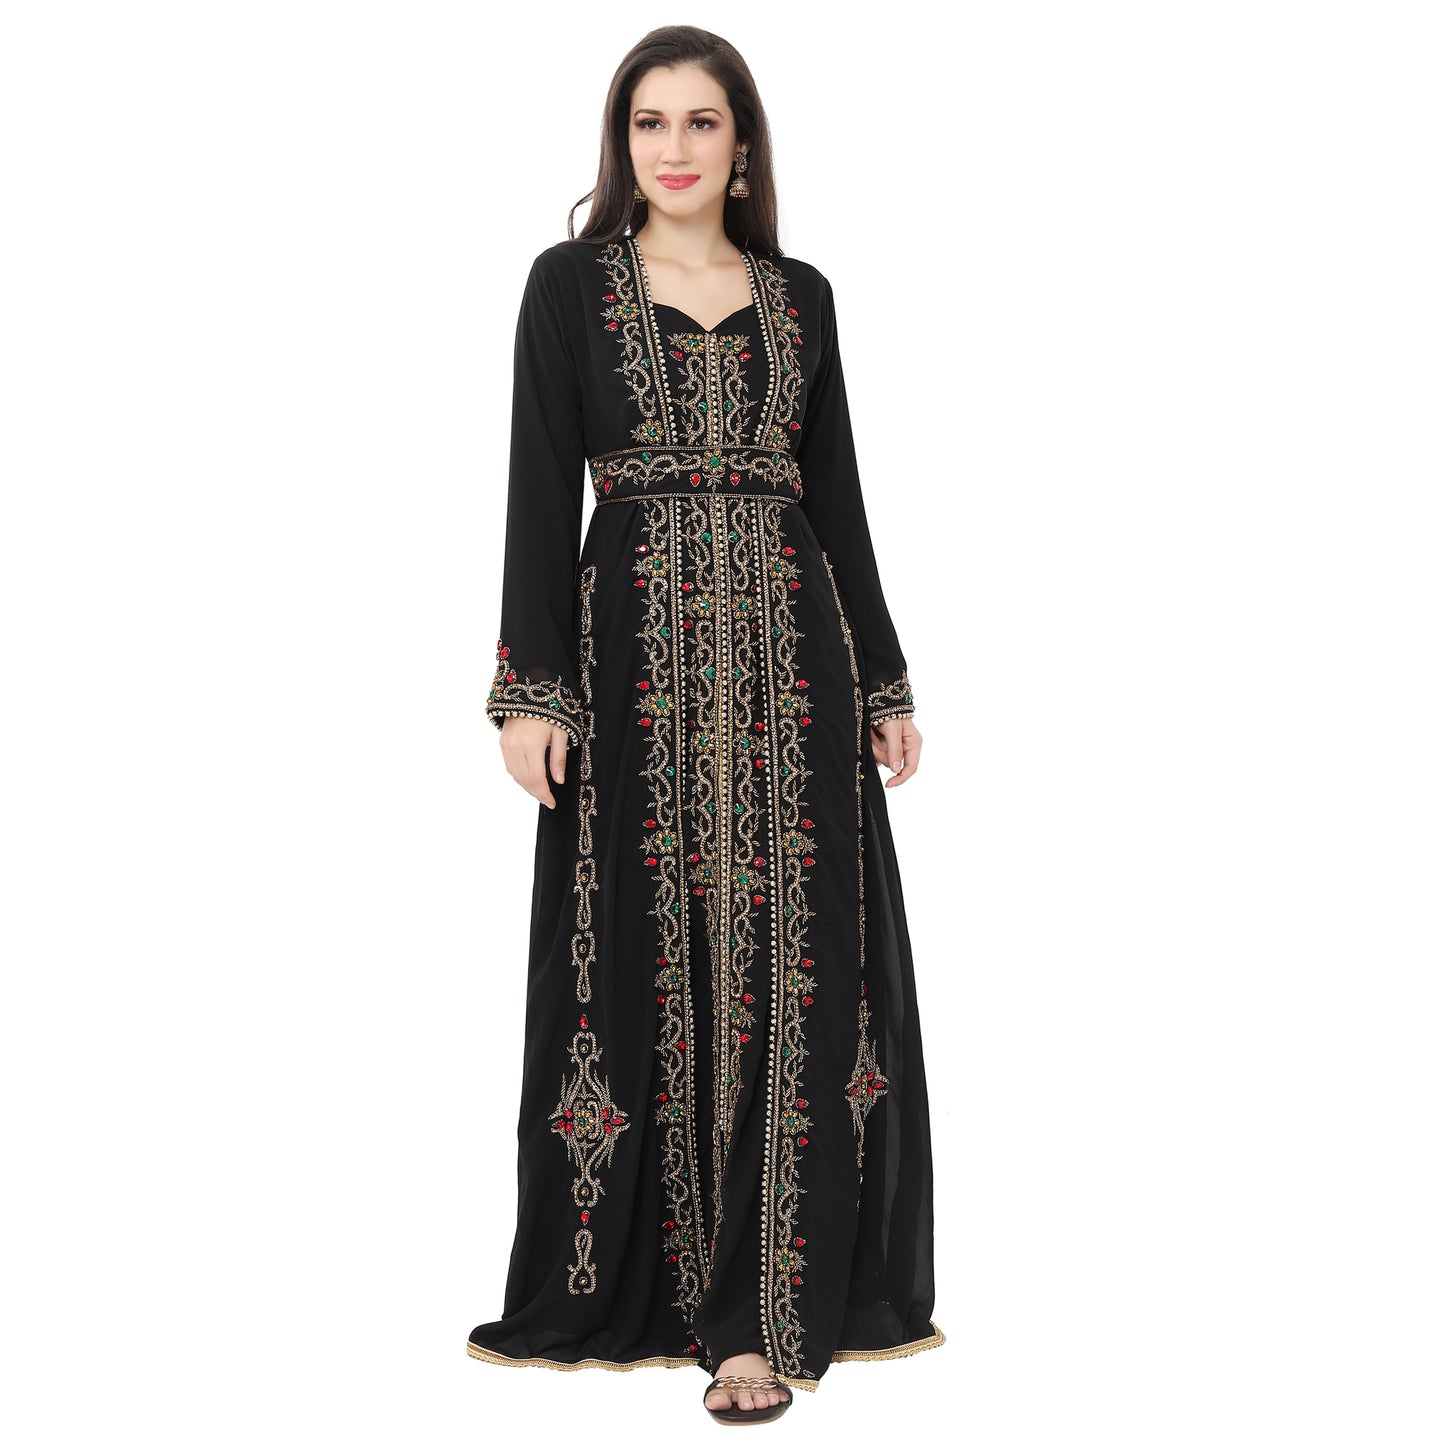 Colorful Hand-Embroidery Henna Tea Party Evening Dress - Maxim Creation